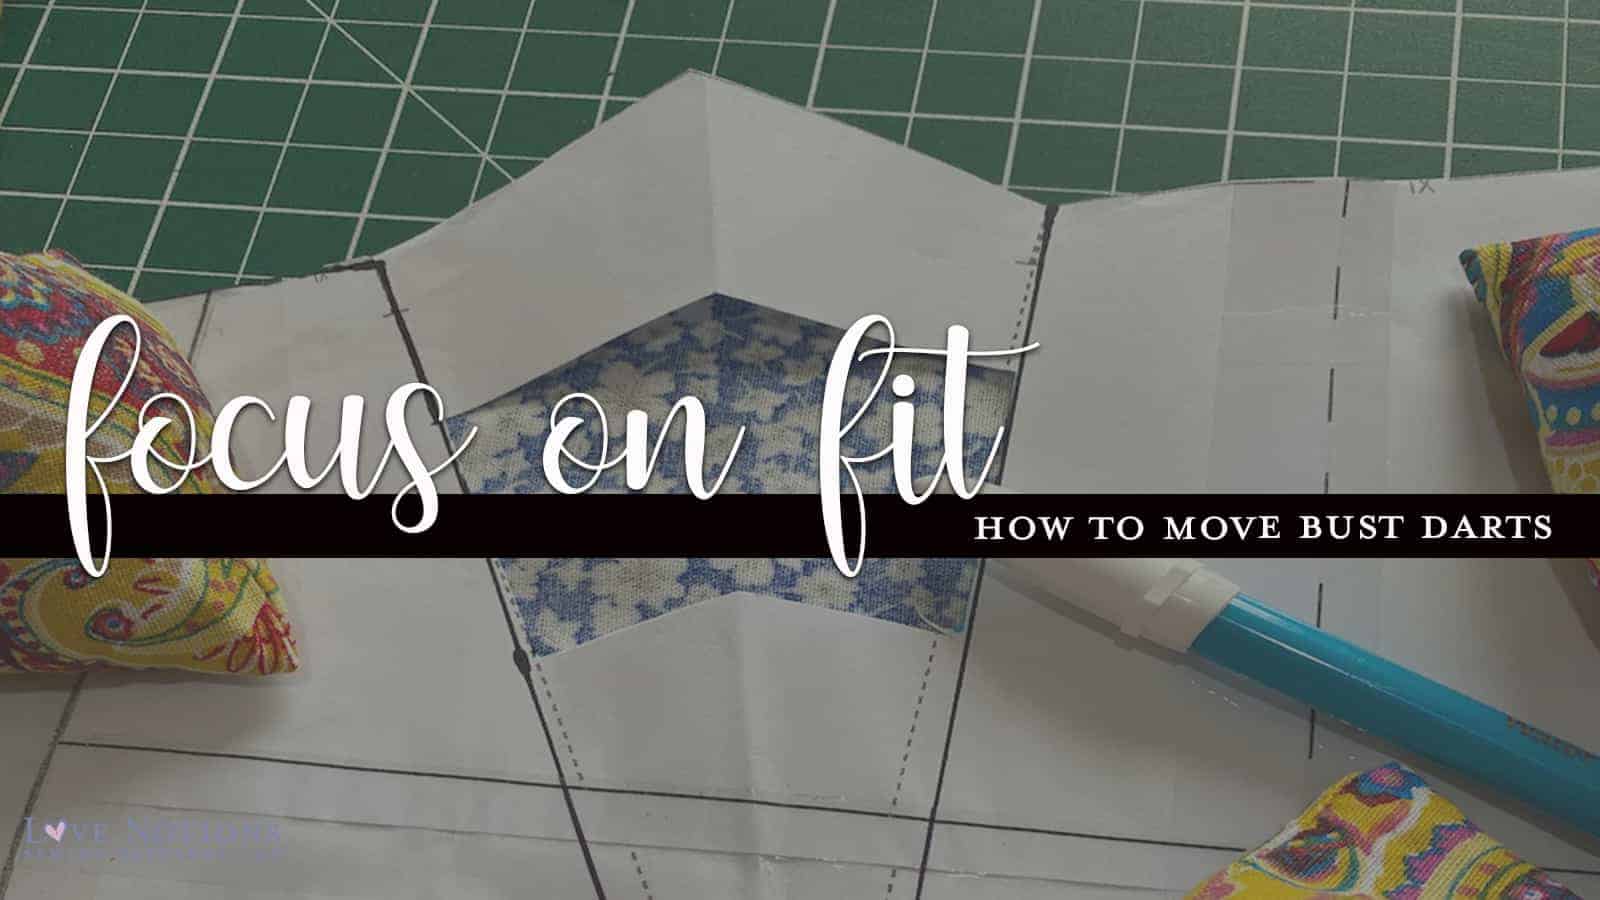 Sewing Pants, Part 2: Altering Pants Pattern Pieces – Sie Macht